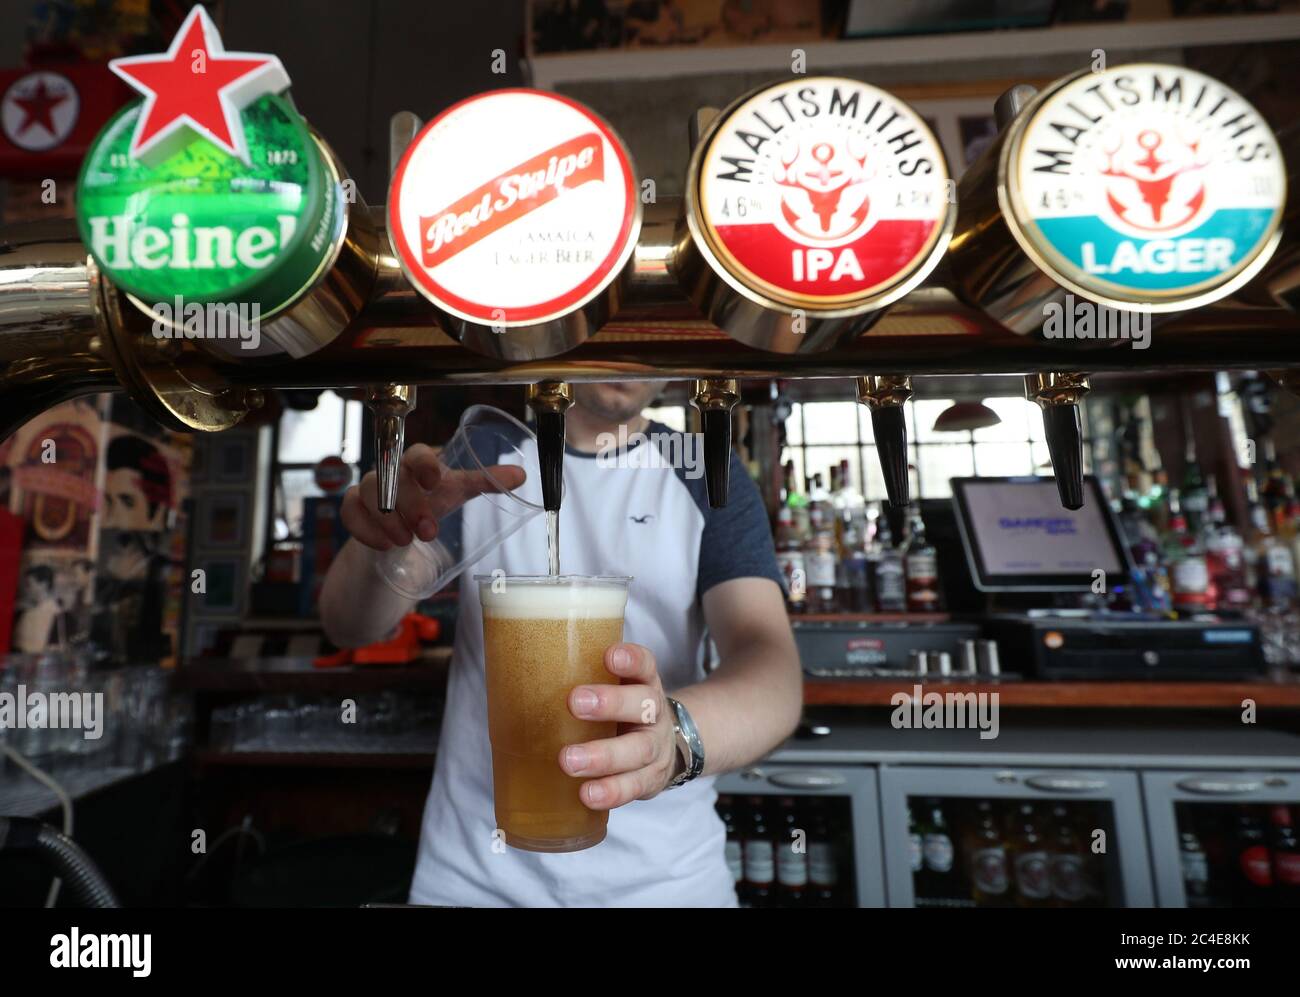 A barman serving takeaway drinks at Charrington's Noted Ales And Stout pub in London, as further coronavirus lockdown restrictions are lifted in England. Stock Photo